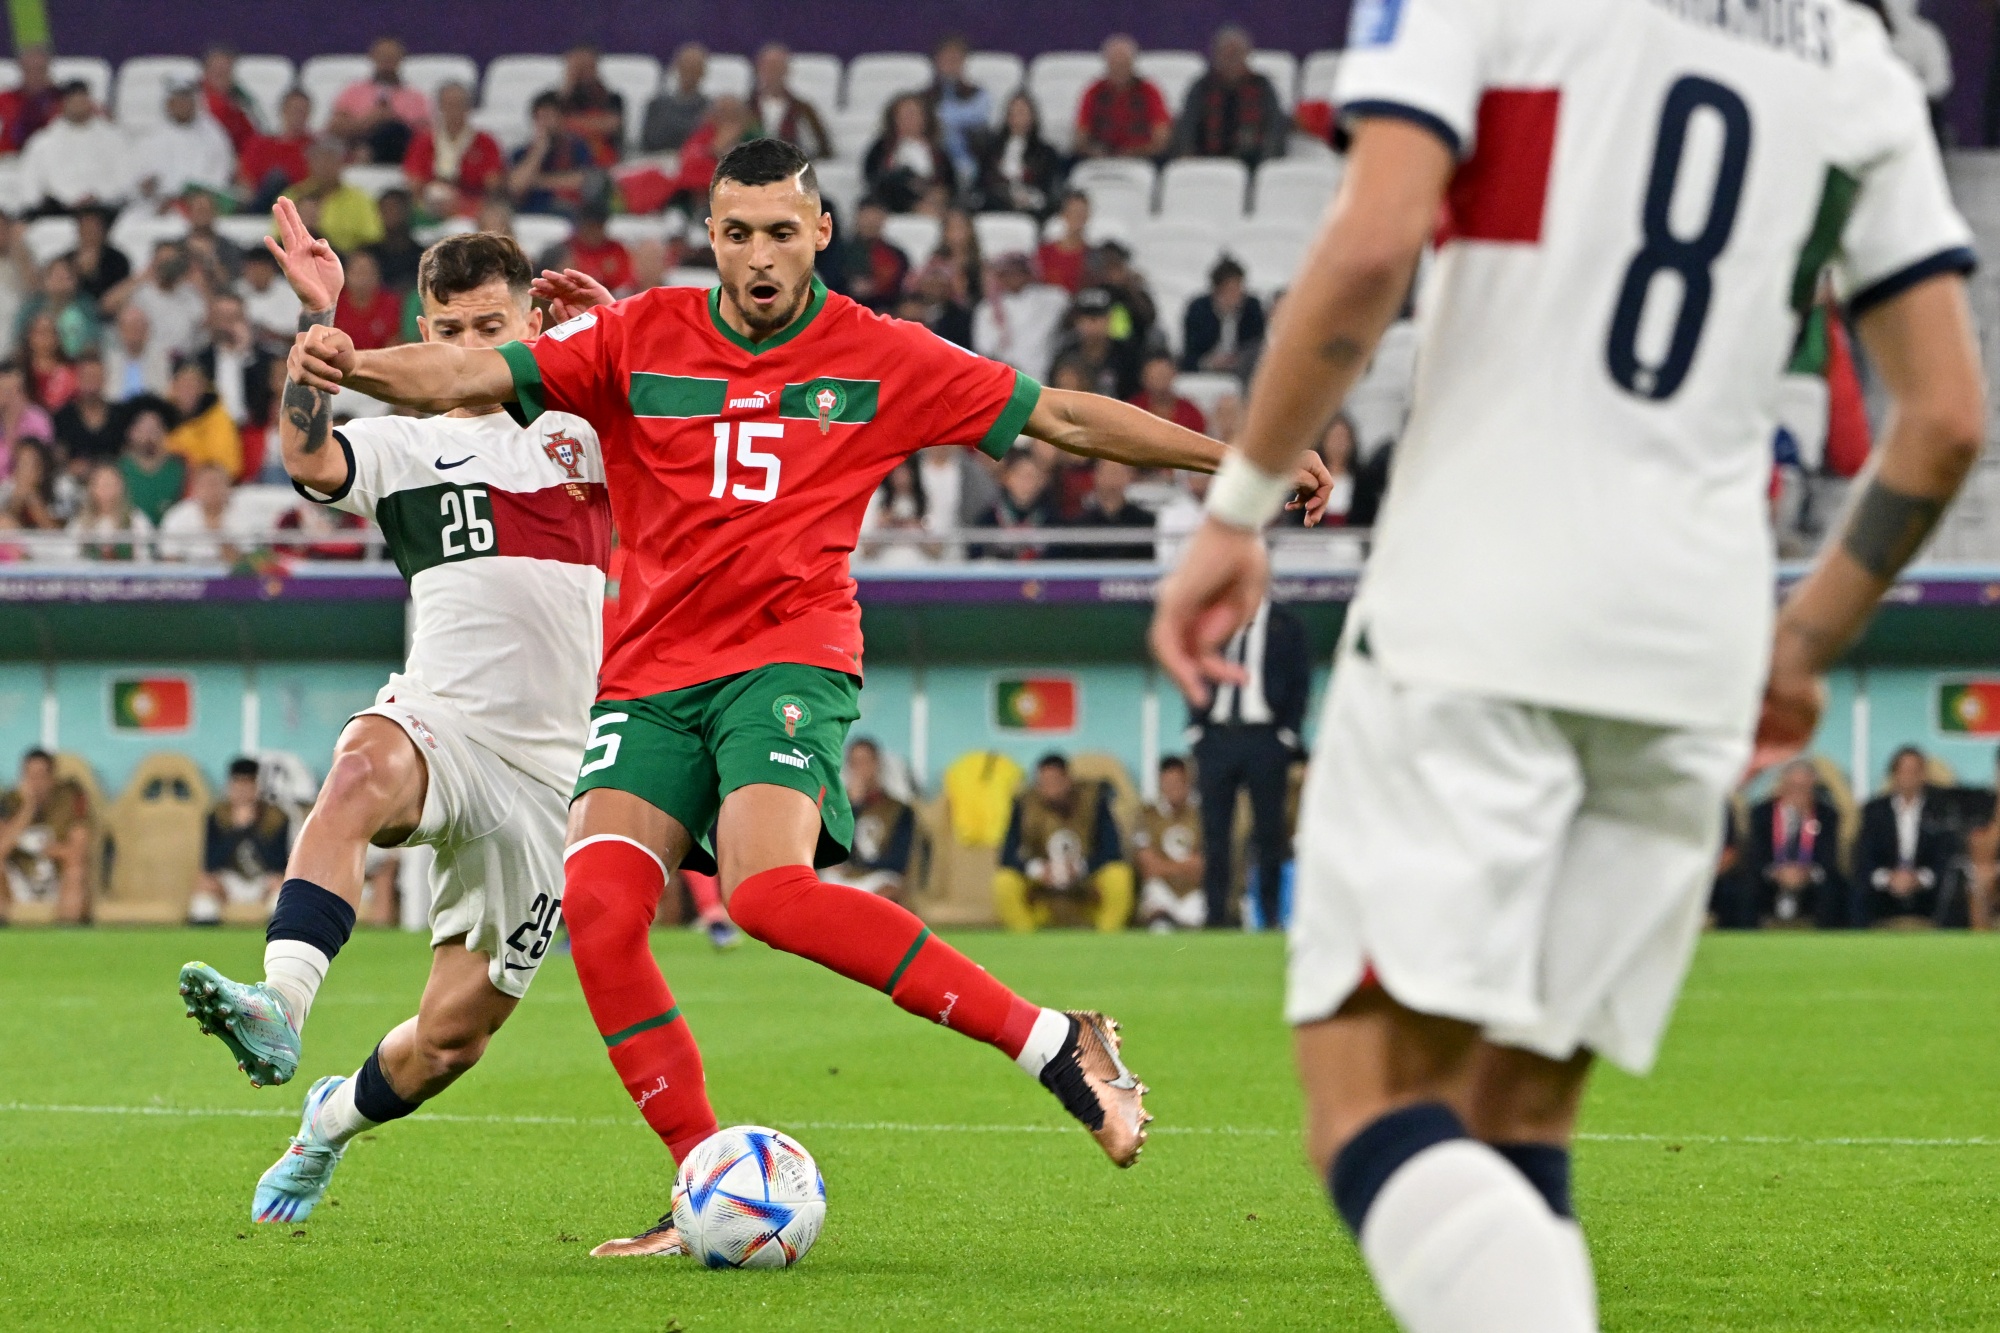 Portugal's midfielder #25 Otavio fights for the ball with Morocco's midfielder #15 Selim Amallah during the Qatar 2022 World Cup quarter-final football match between Morocco and Portugal at the Al-Thumama Stadium in Doha on December 10, 2022. (Photo by Alberto PIZZOLI / AFP)